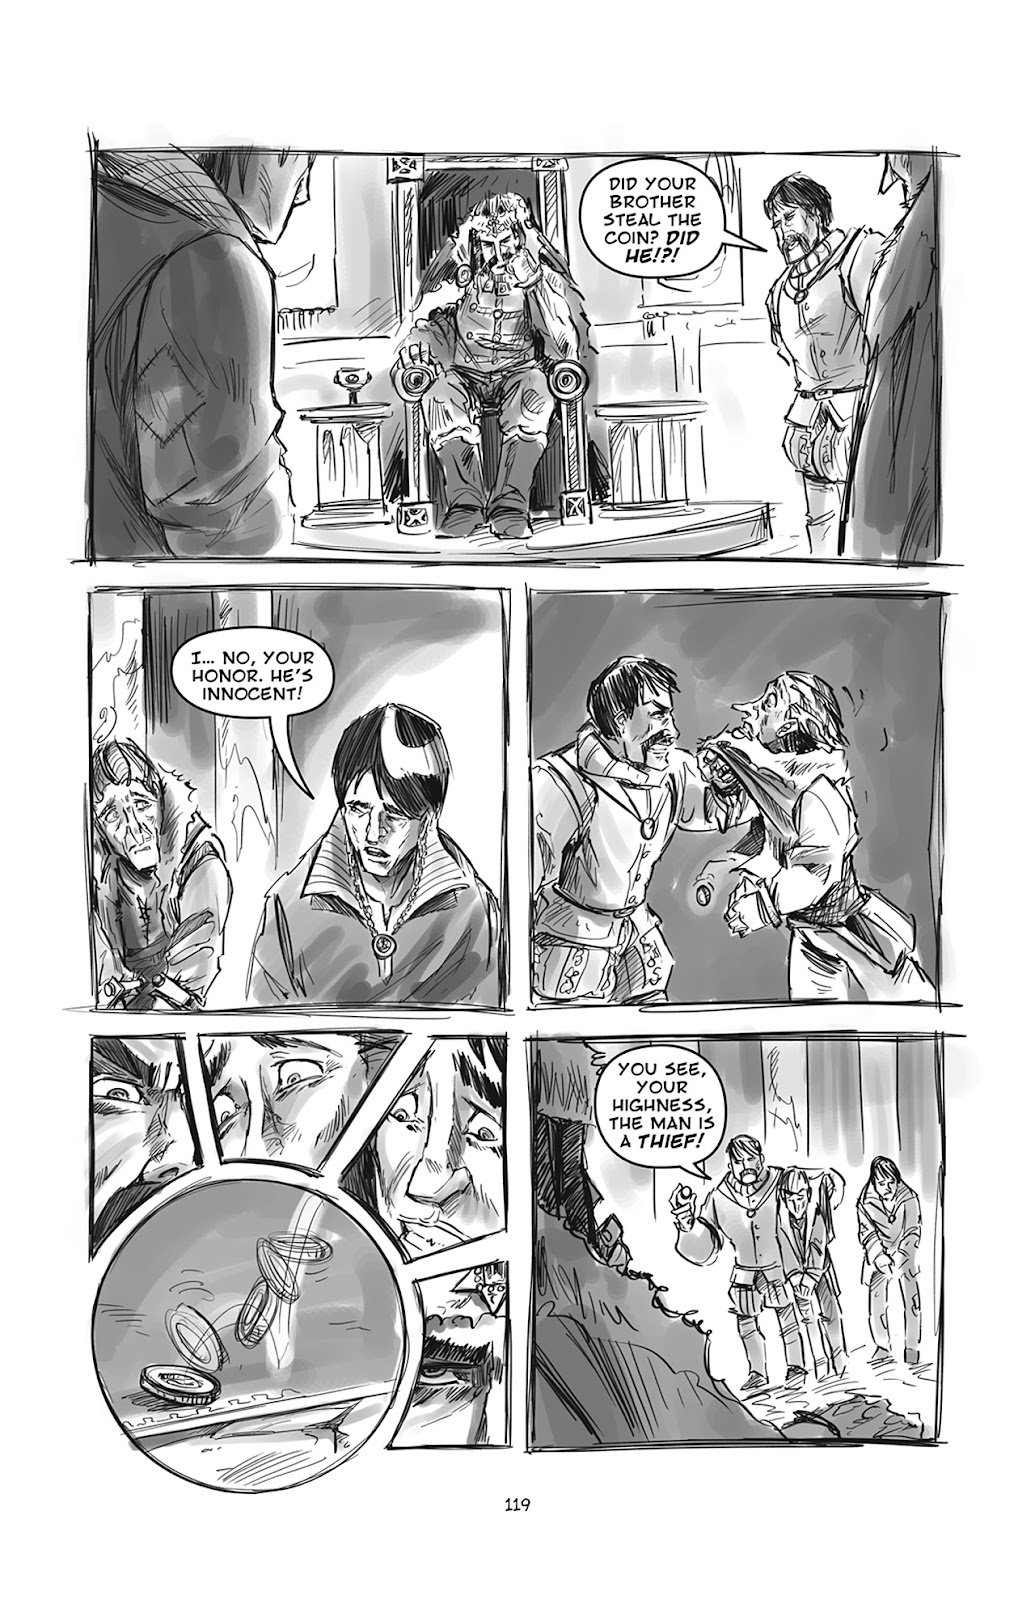 Pinocchio: Vampire Slayer - Of Wood and Blood issue 5 - Page 20